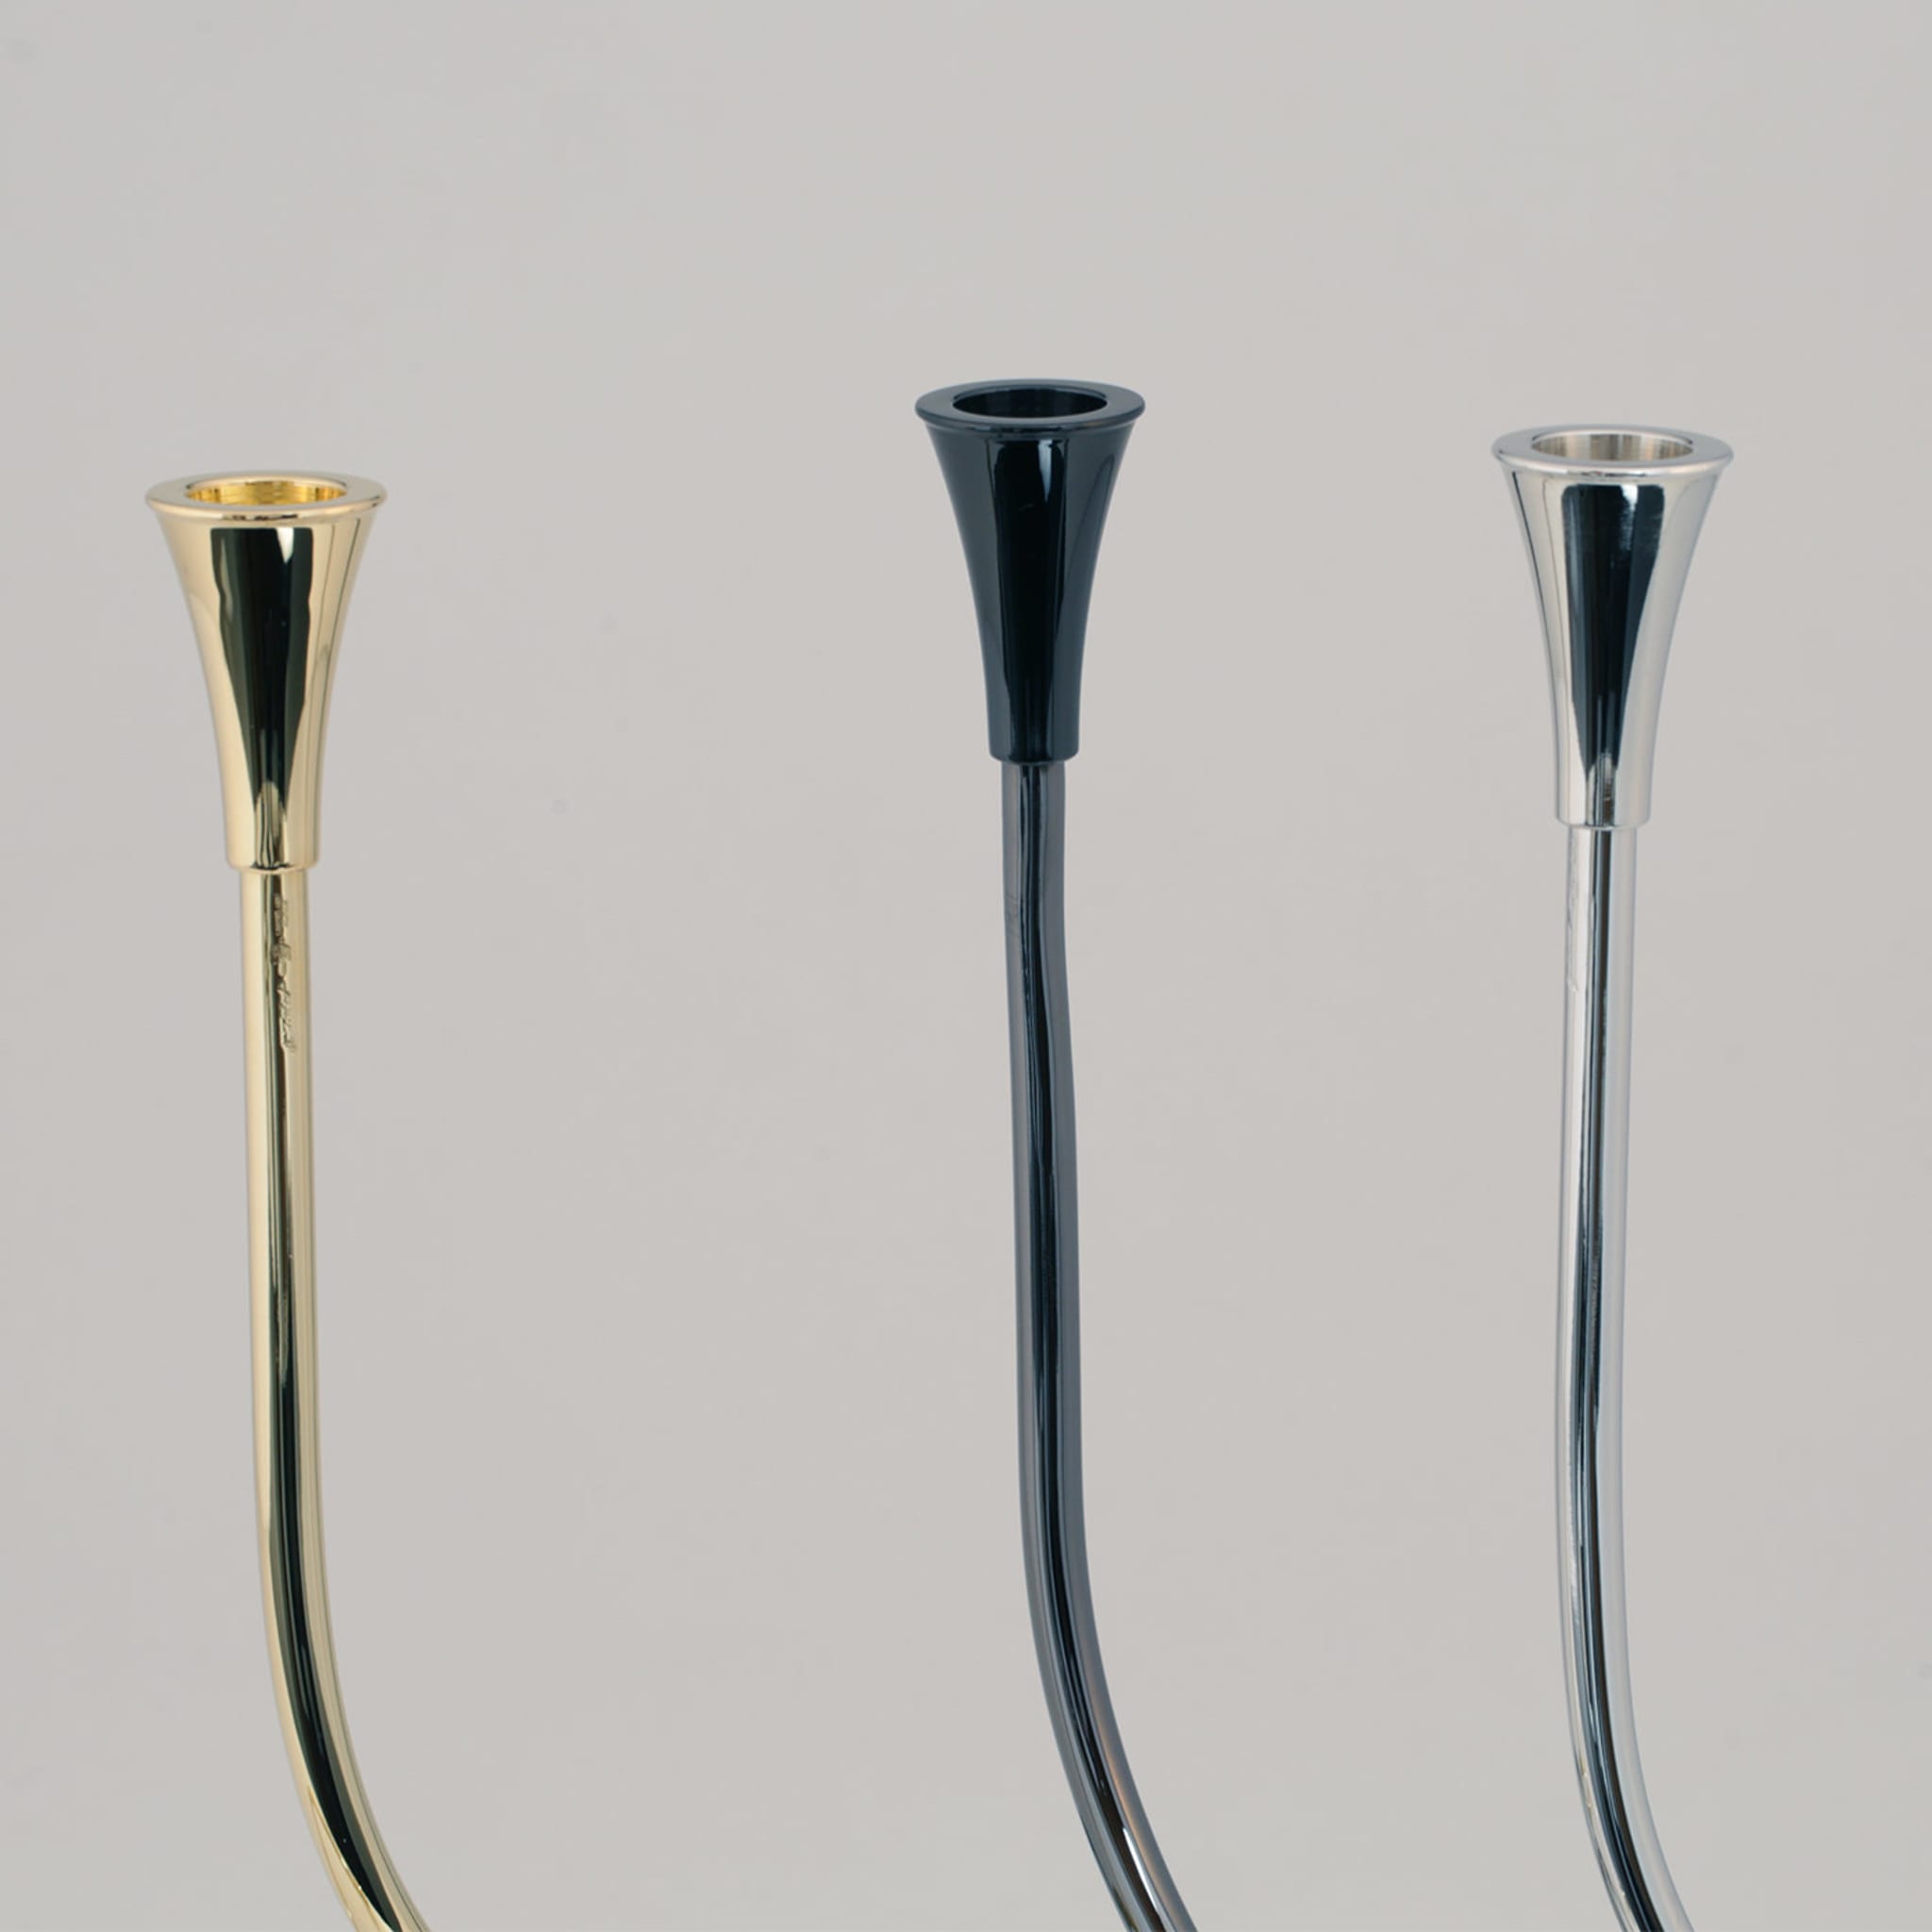 Malibù Set of 3 Candle Holders - Alternative view 4